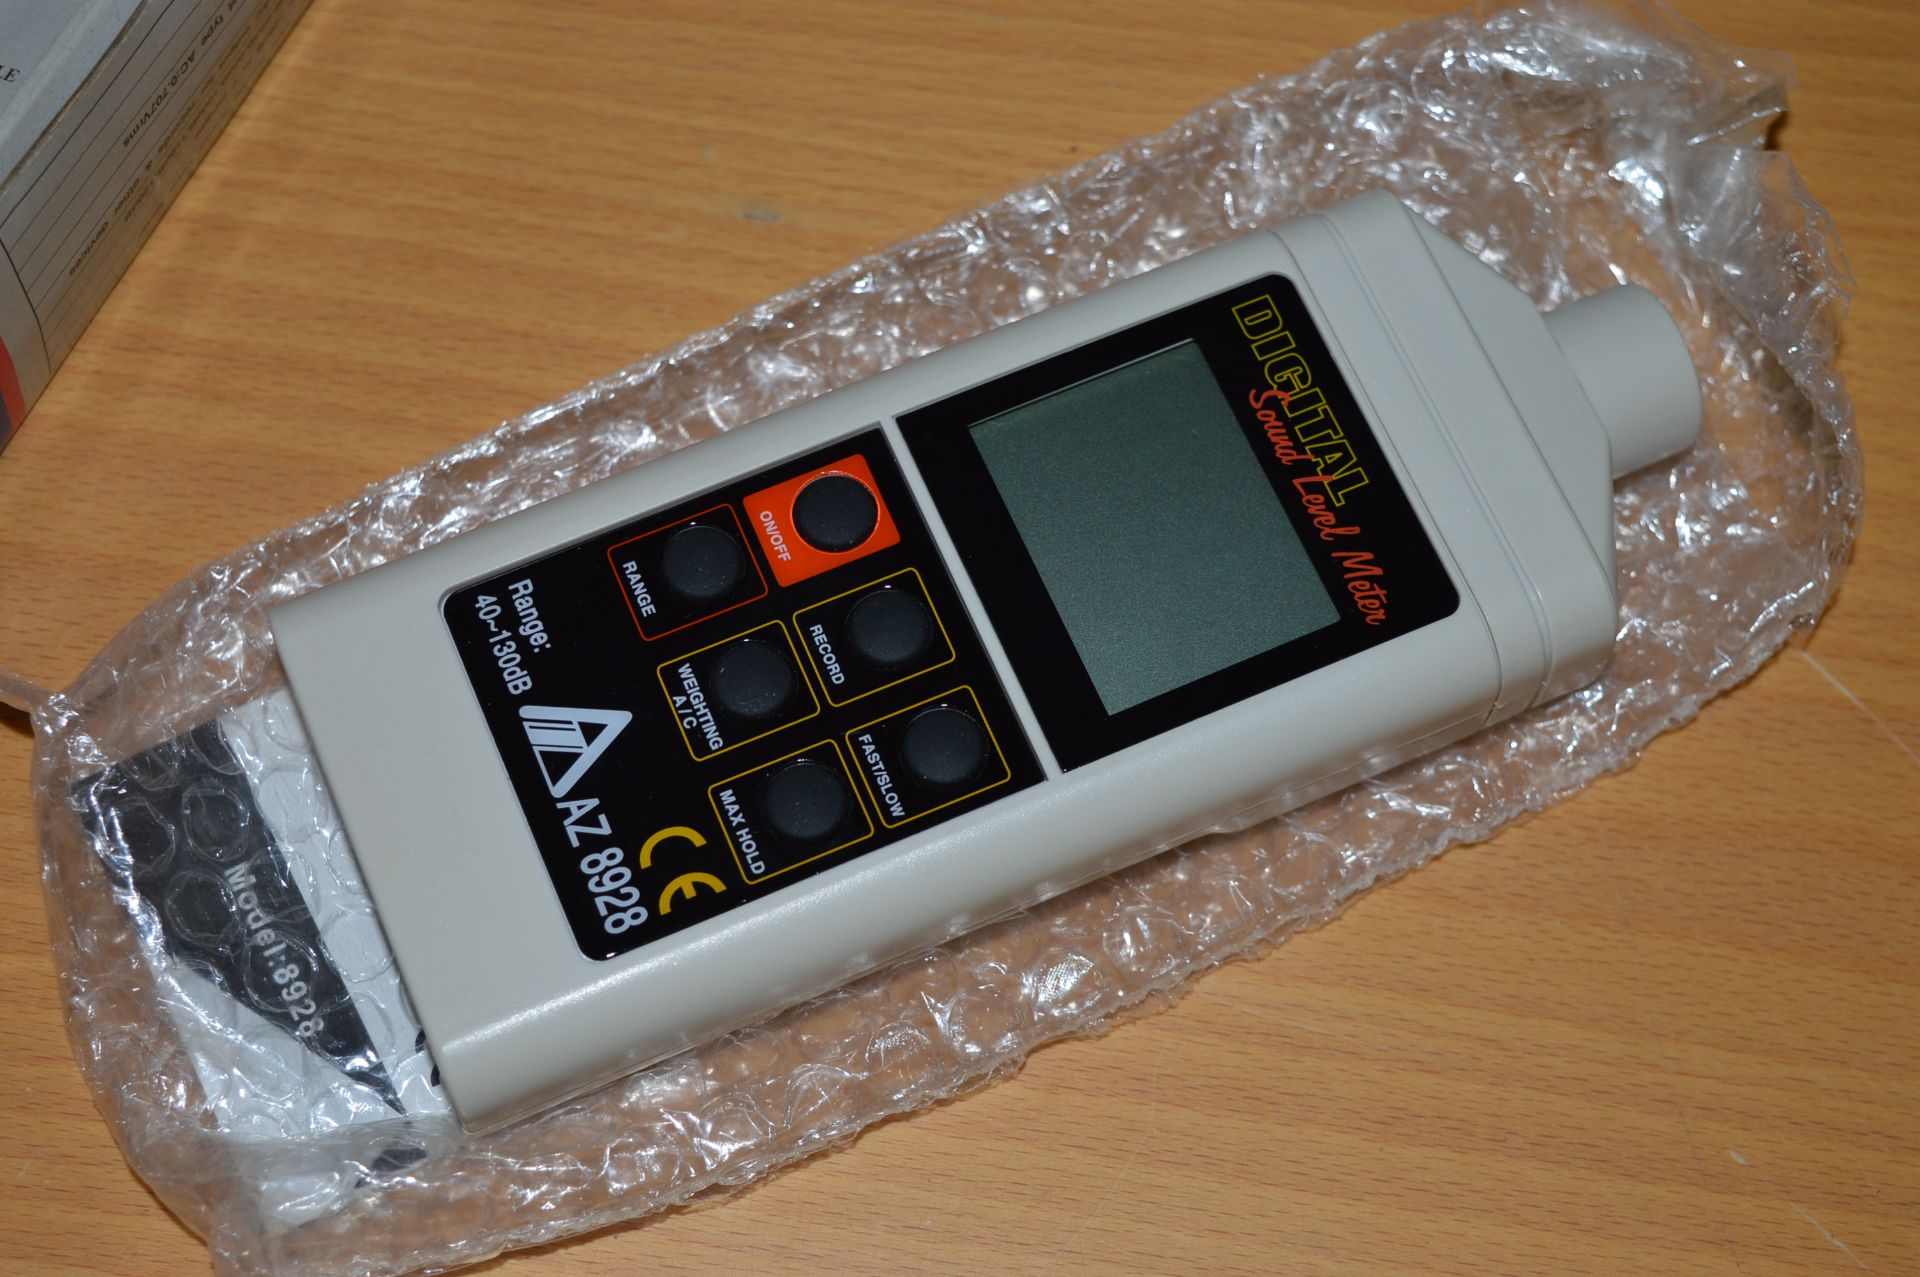 1 x Portable Sound Level Meter - Midel AZ 8928  - Boxed With Instructions, Software CD and Product